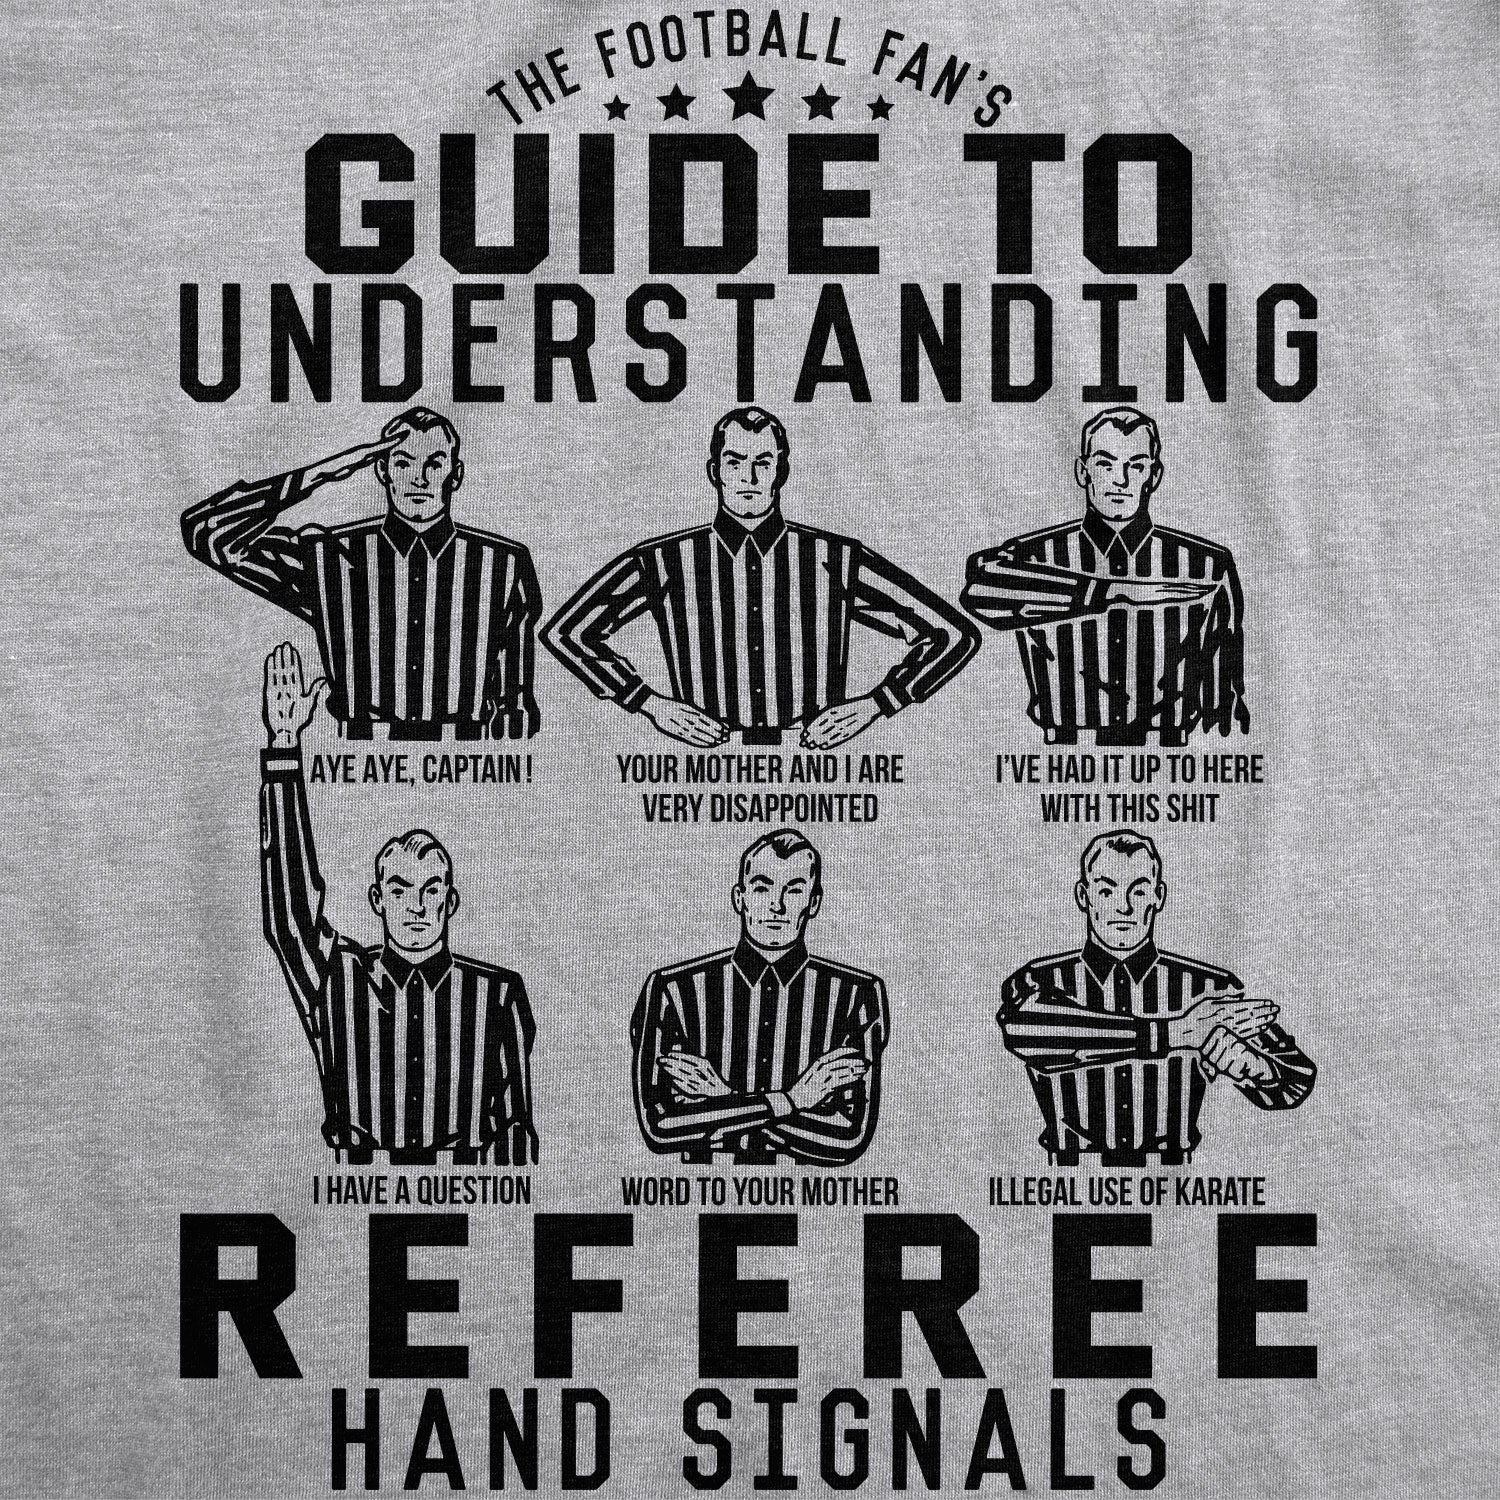 Funny Light Heather Grey - Hand Signals A Football Fan's Guide To Understanding Referee Hand Signals Mens T Shirt Nerdy Football Tee